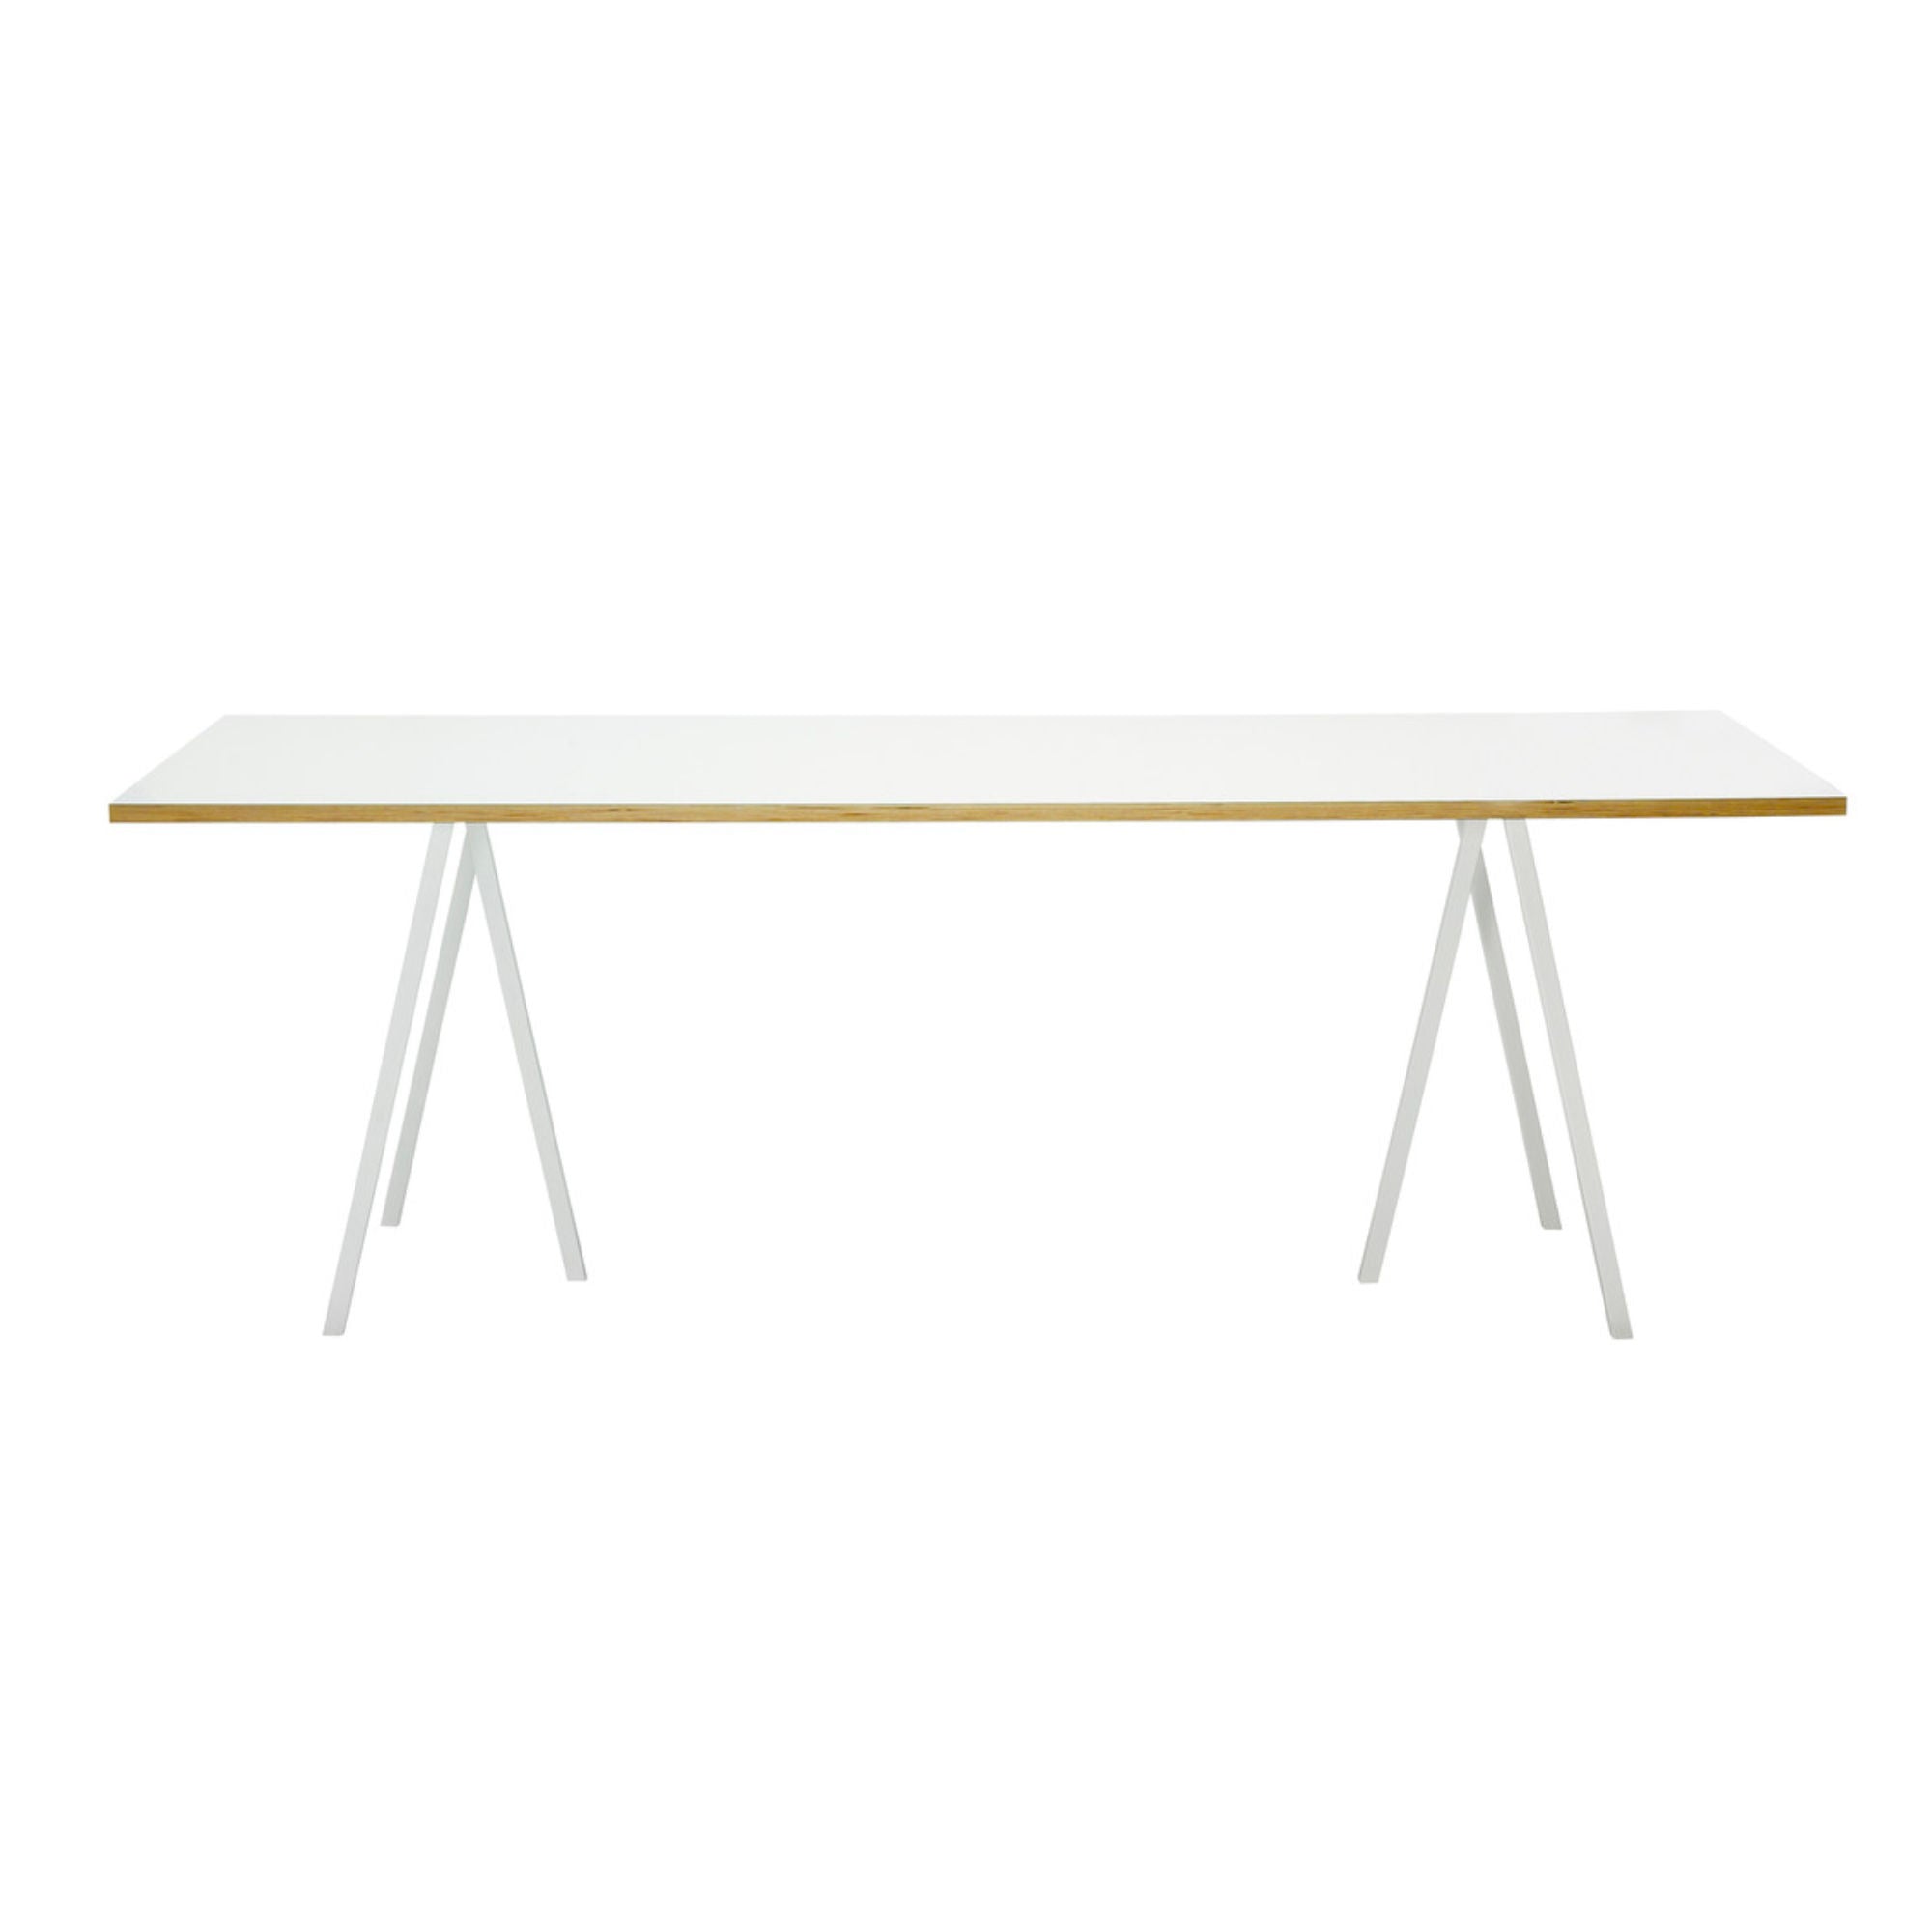 Loop Stand Rectangular Table L200 x W92.5 , White